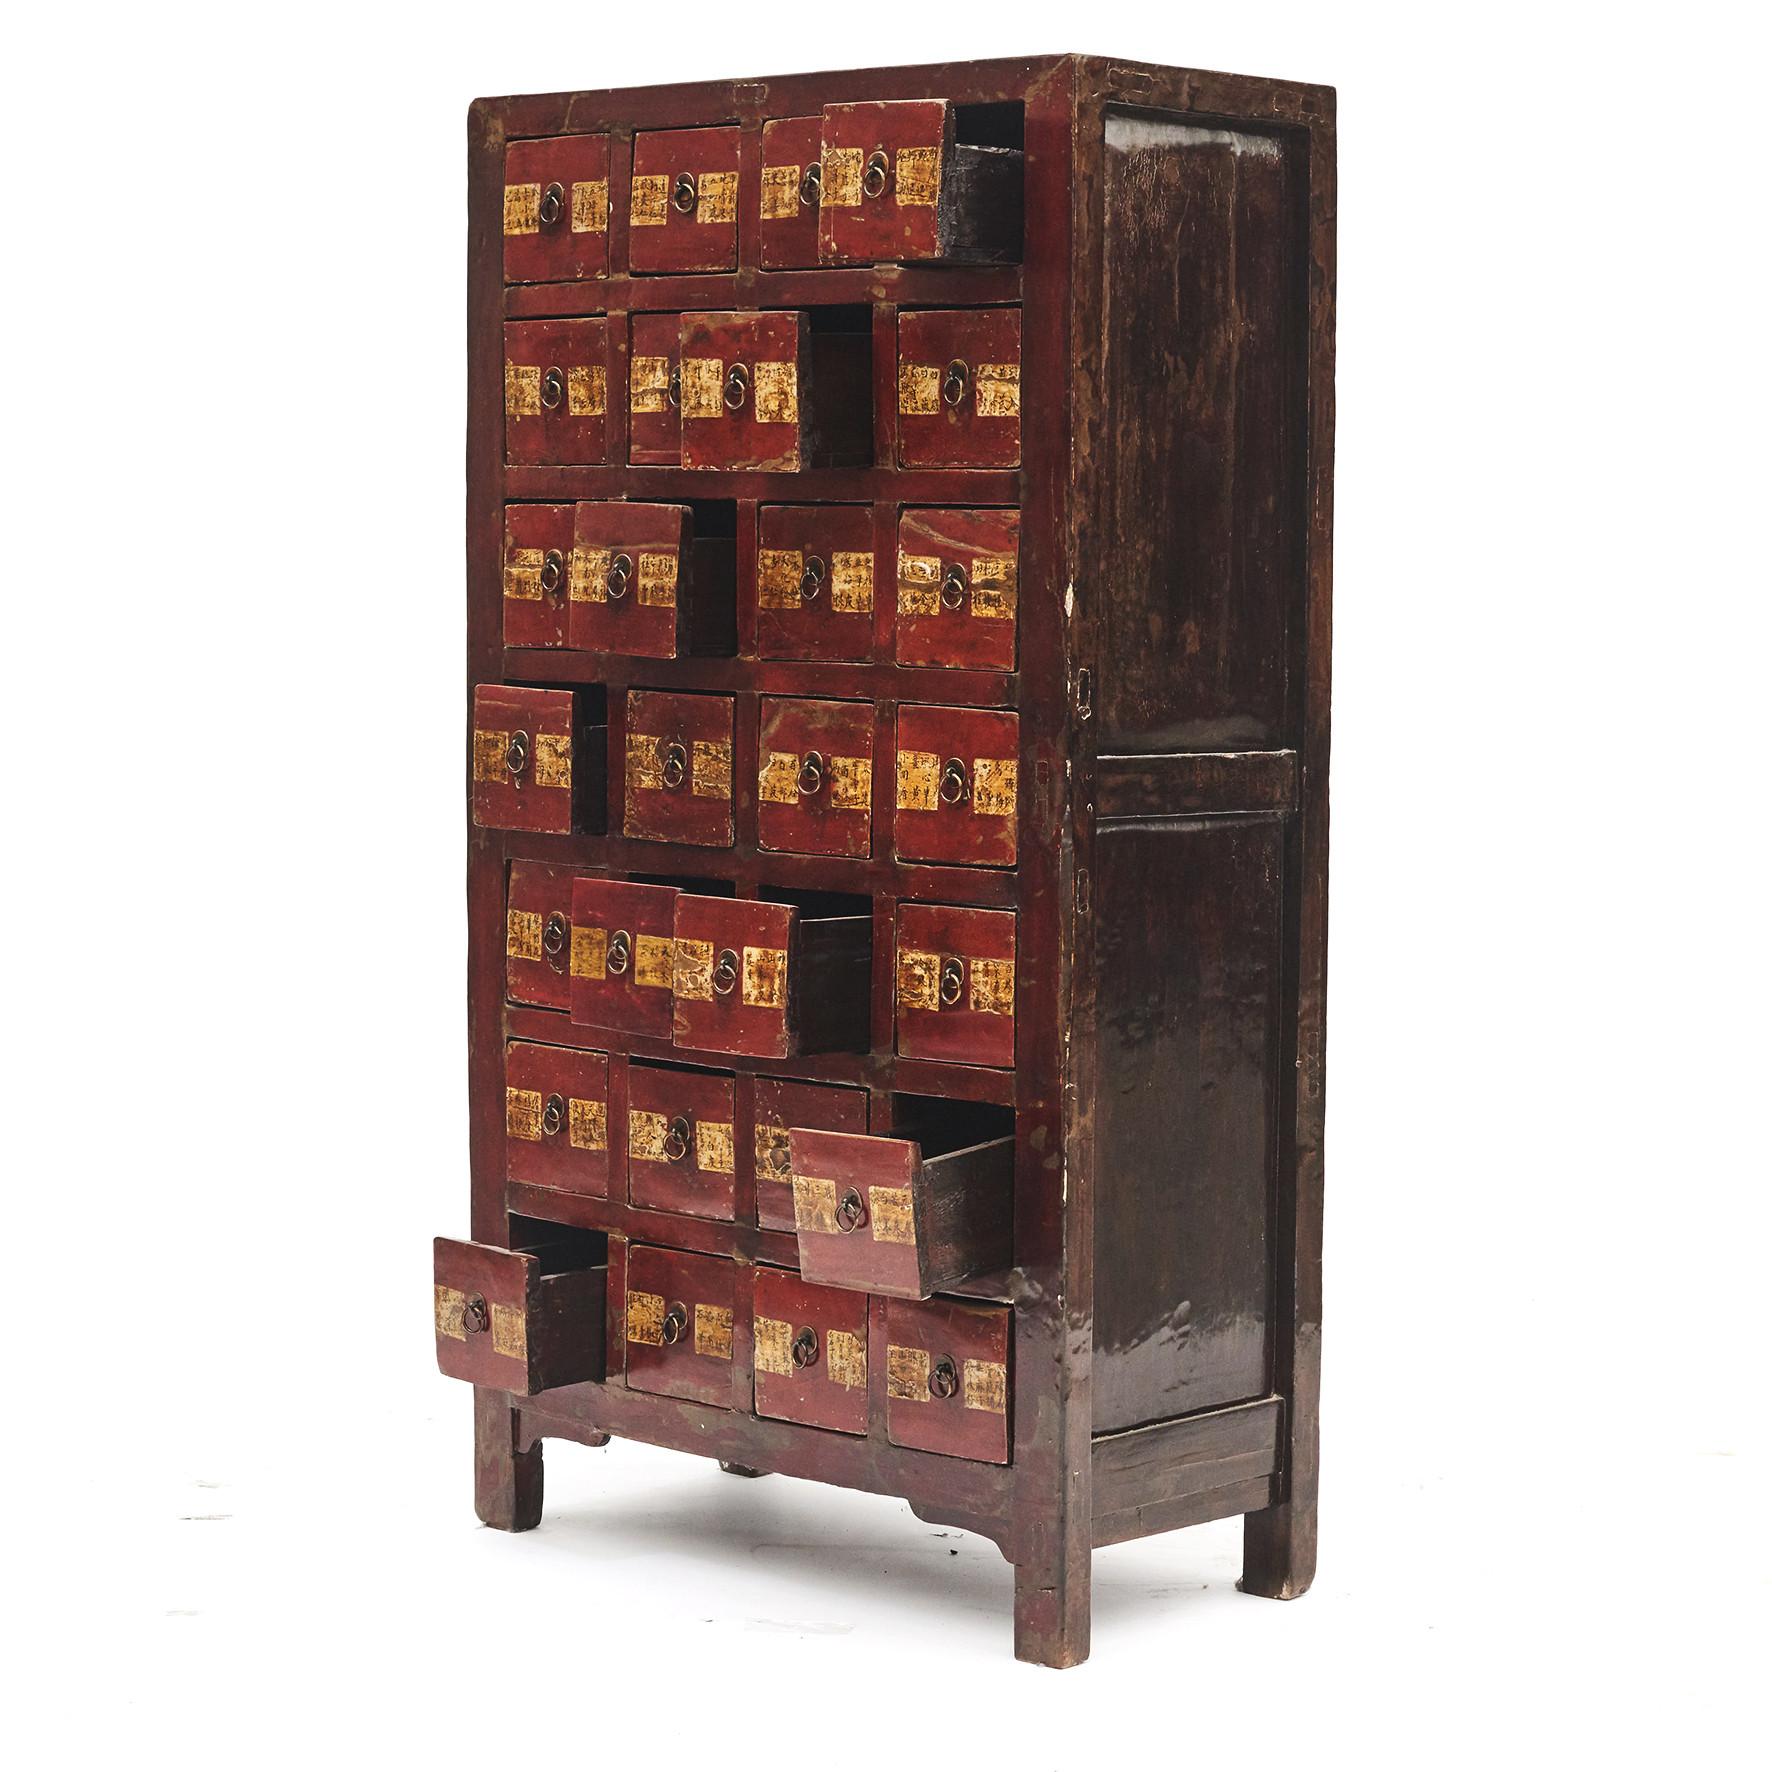 Chinese Apothecary 'Farmacy' Medicine Chest 6